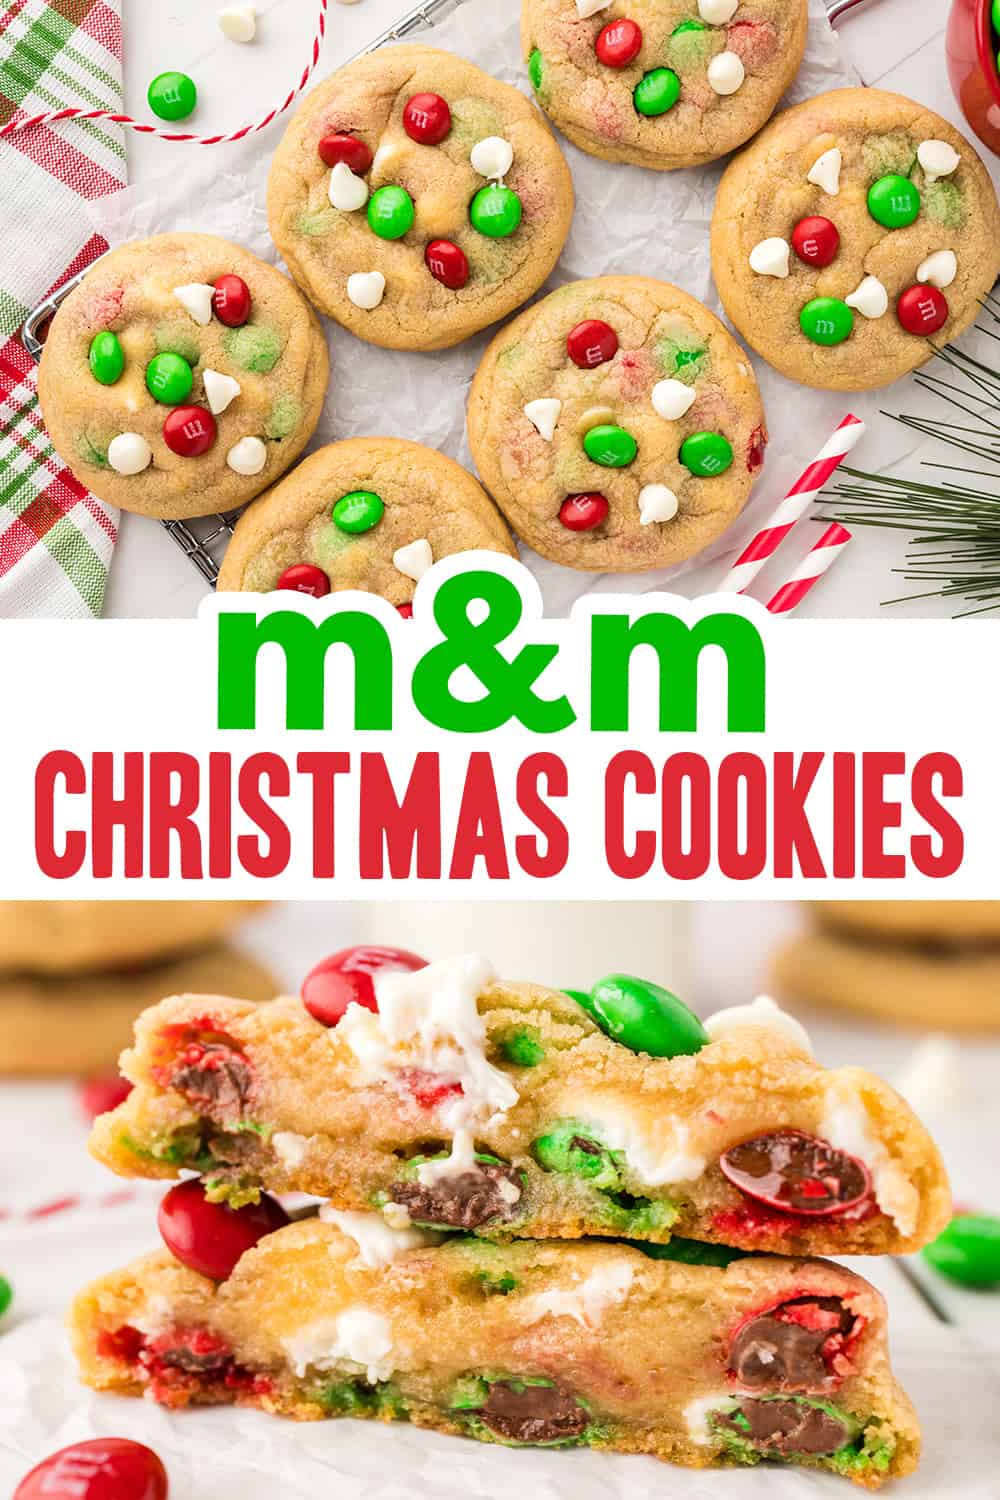 Collage of mm Christmas cookie images.